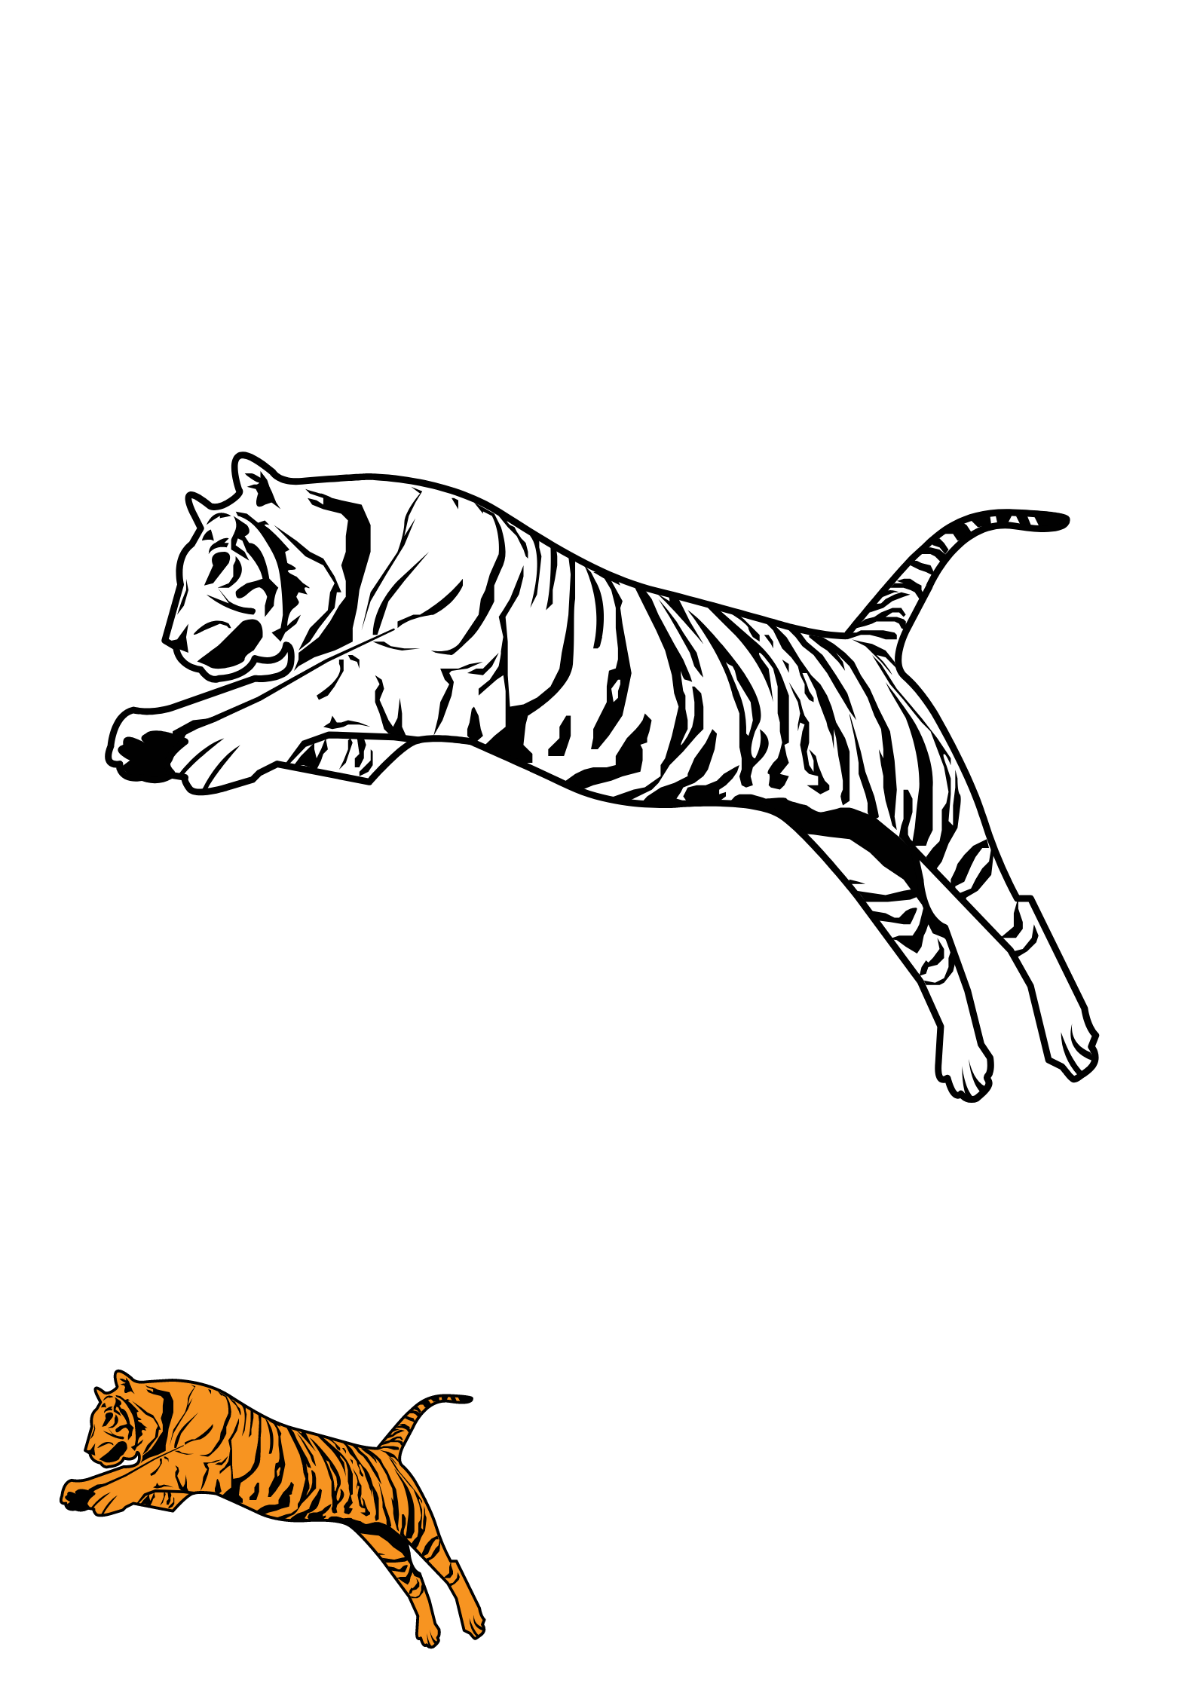 Leaping Tiger Coloring Page Template